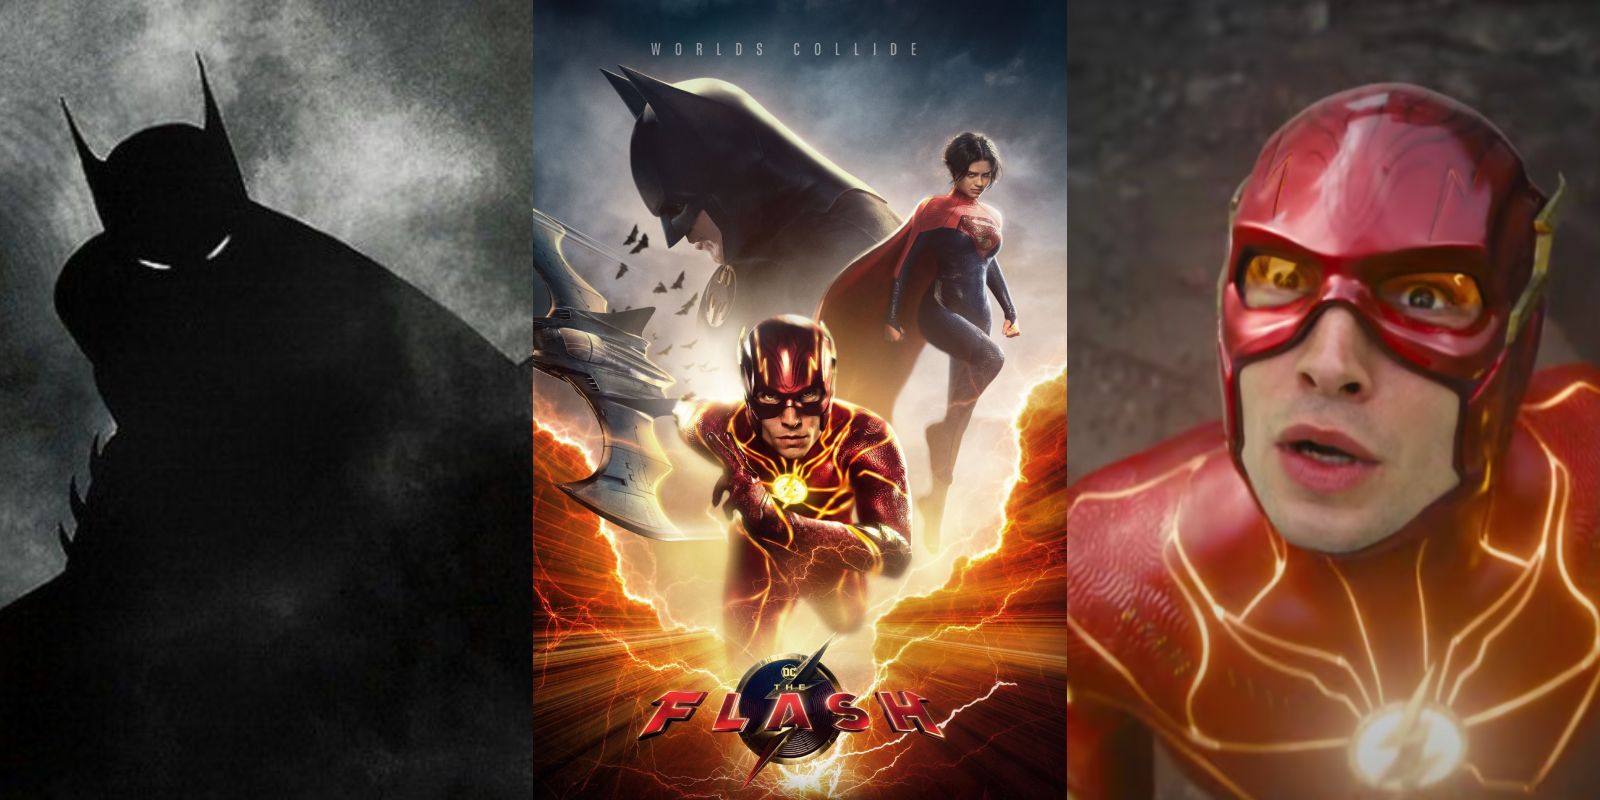 The Flash' movie ending explained, plus cameo spoilers, post-credits